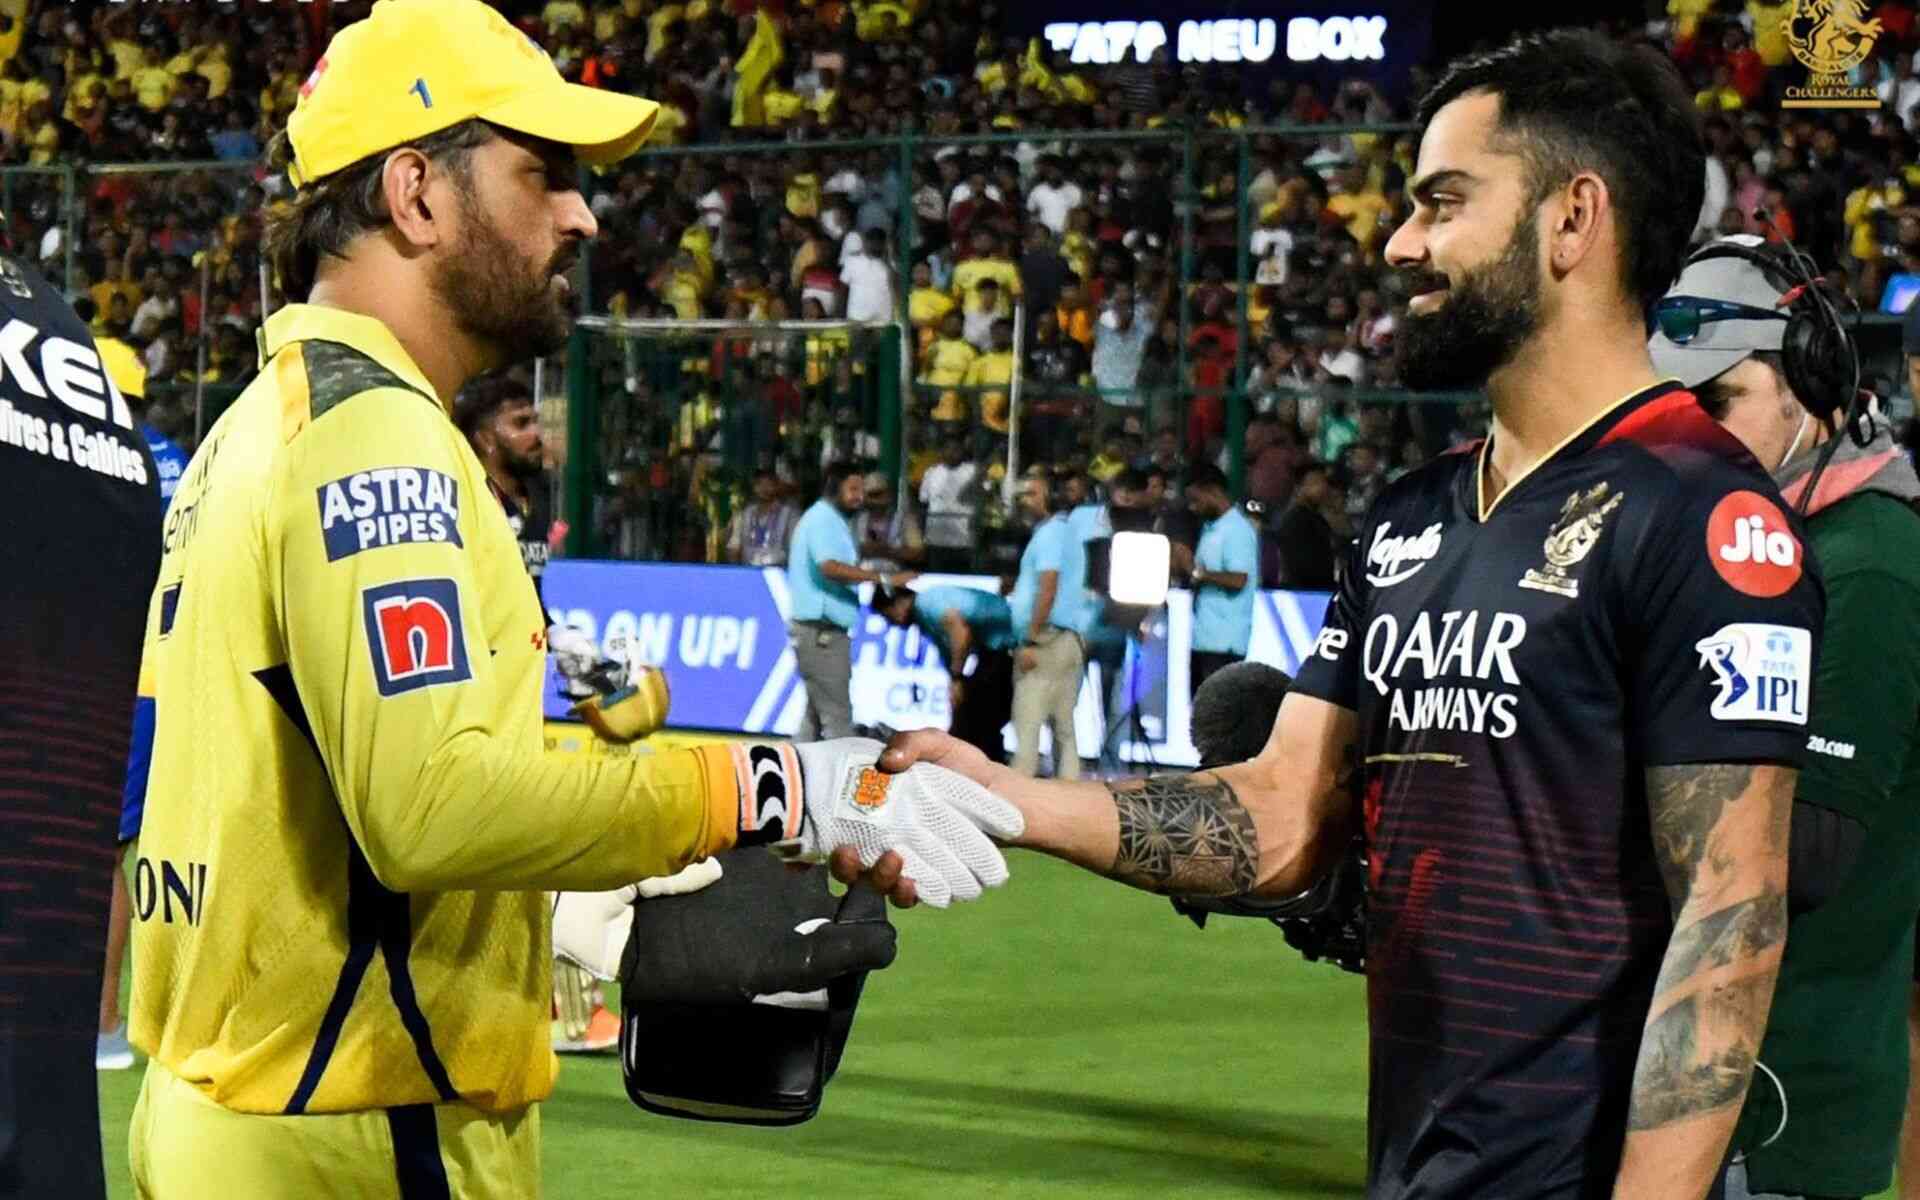 201 To Chase For RCB In 18.1 Overs vs CSK; Here Are Scenarios For RCB's IPL 2024 Playoffs Qualification